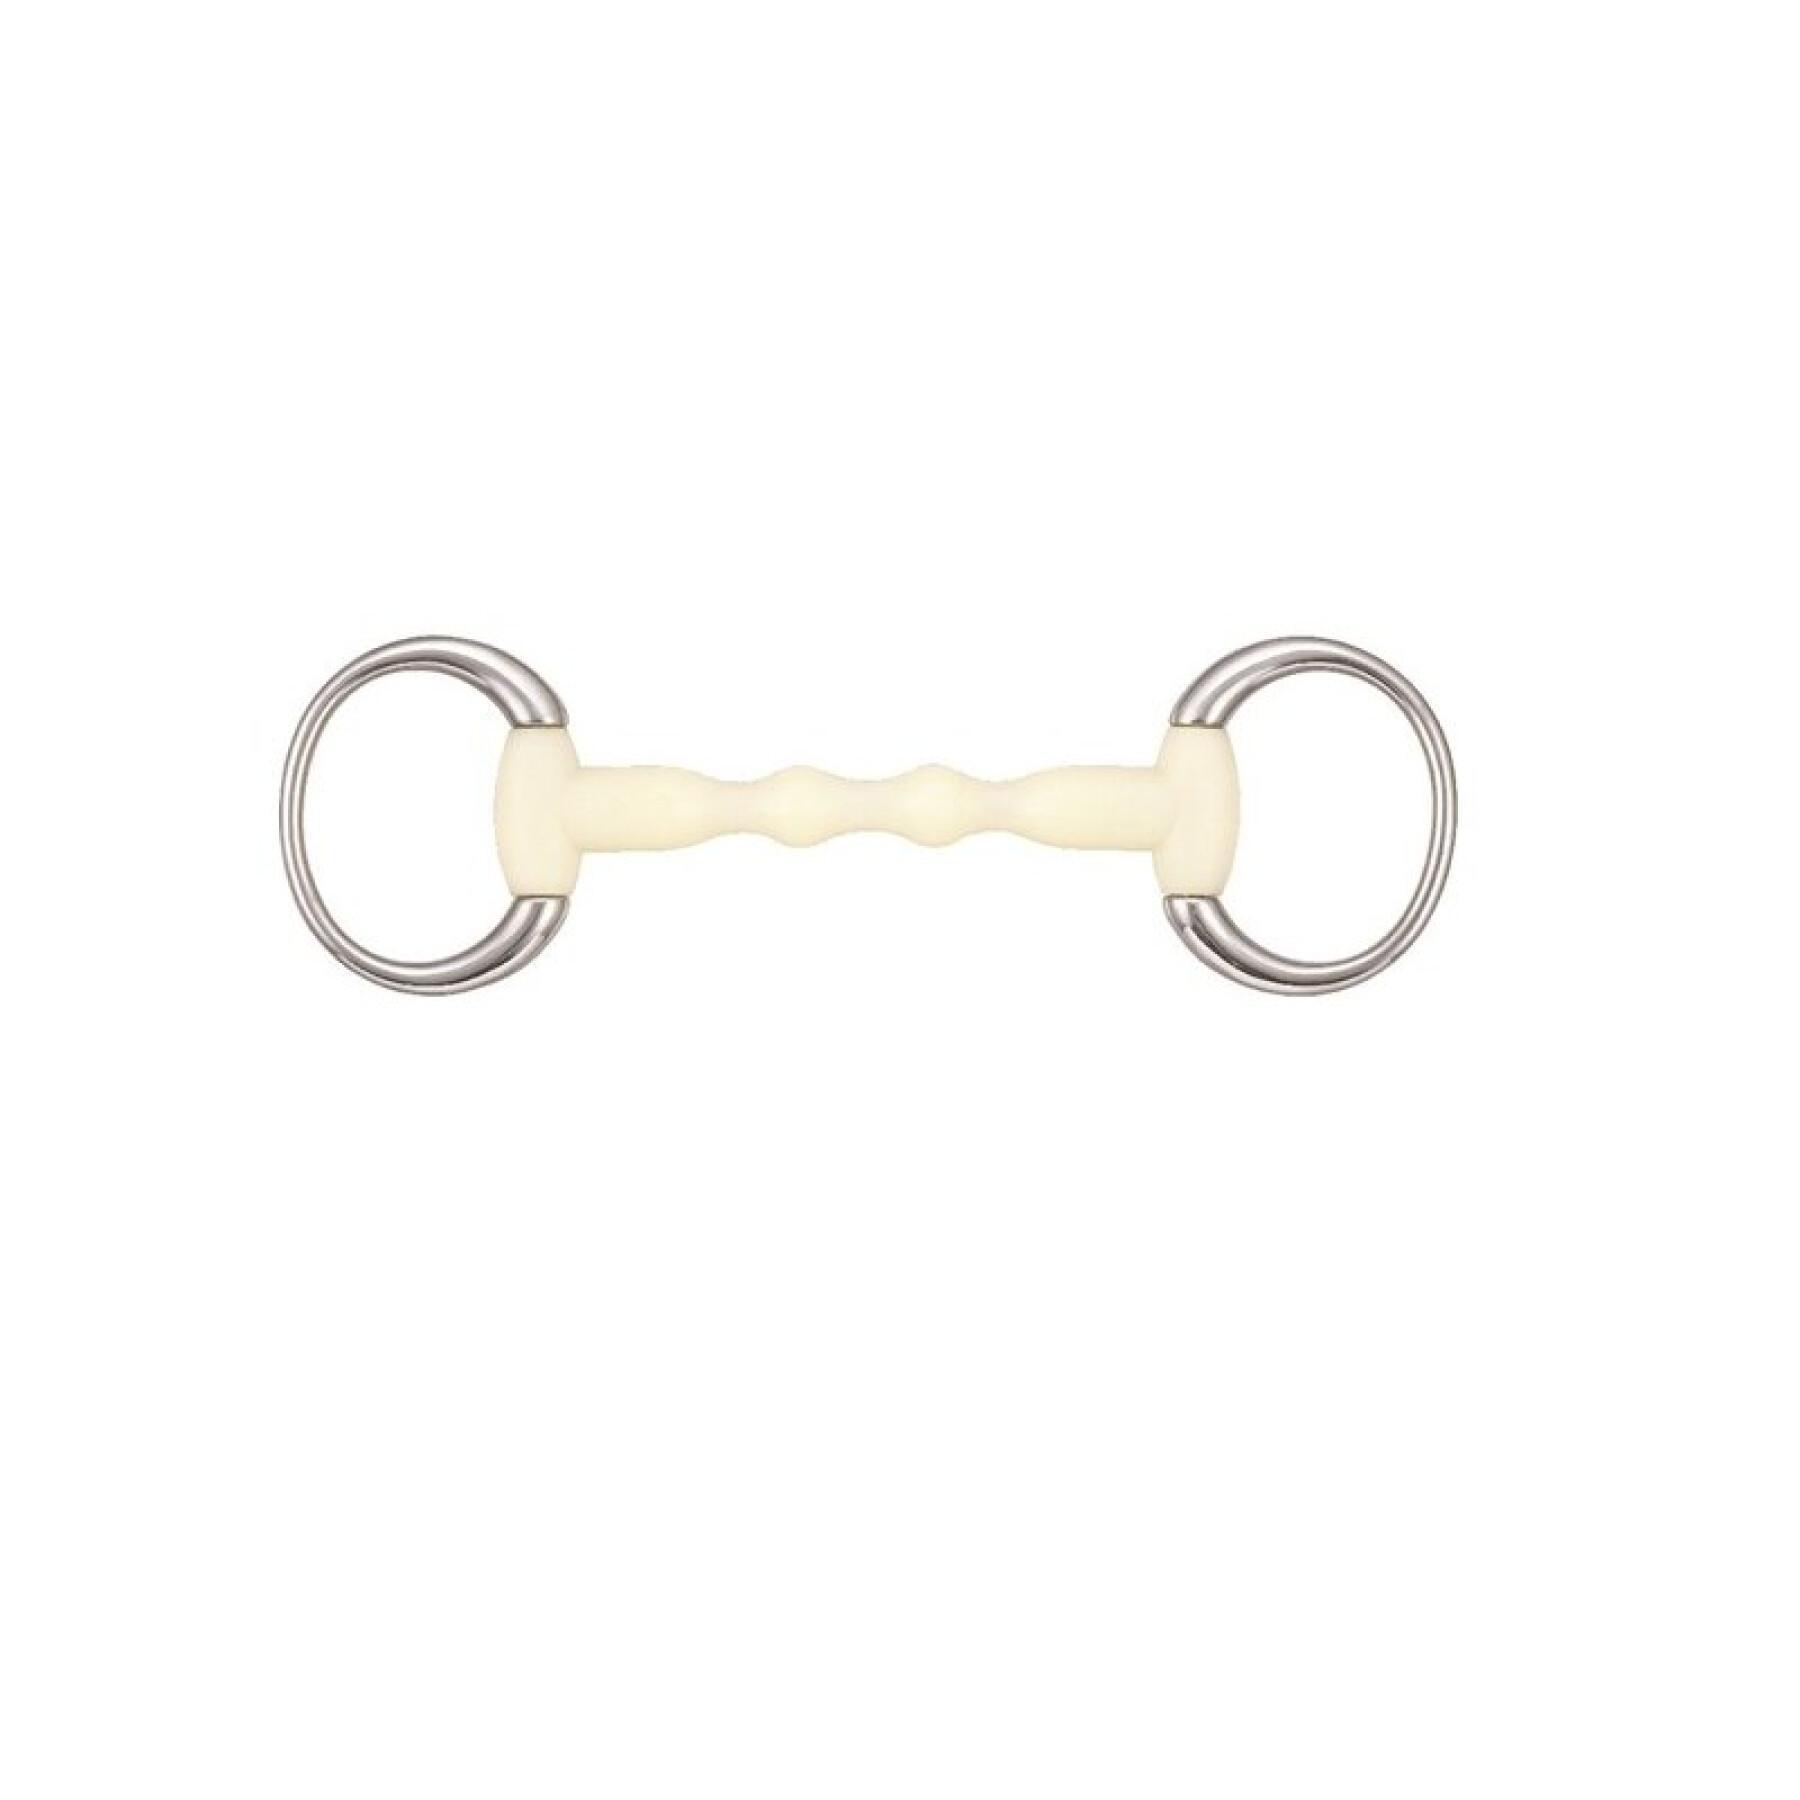 Olivenkopftrense Soyo Happy mouth "mullen" round ring